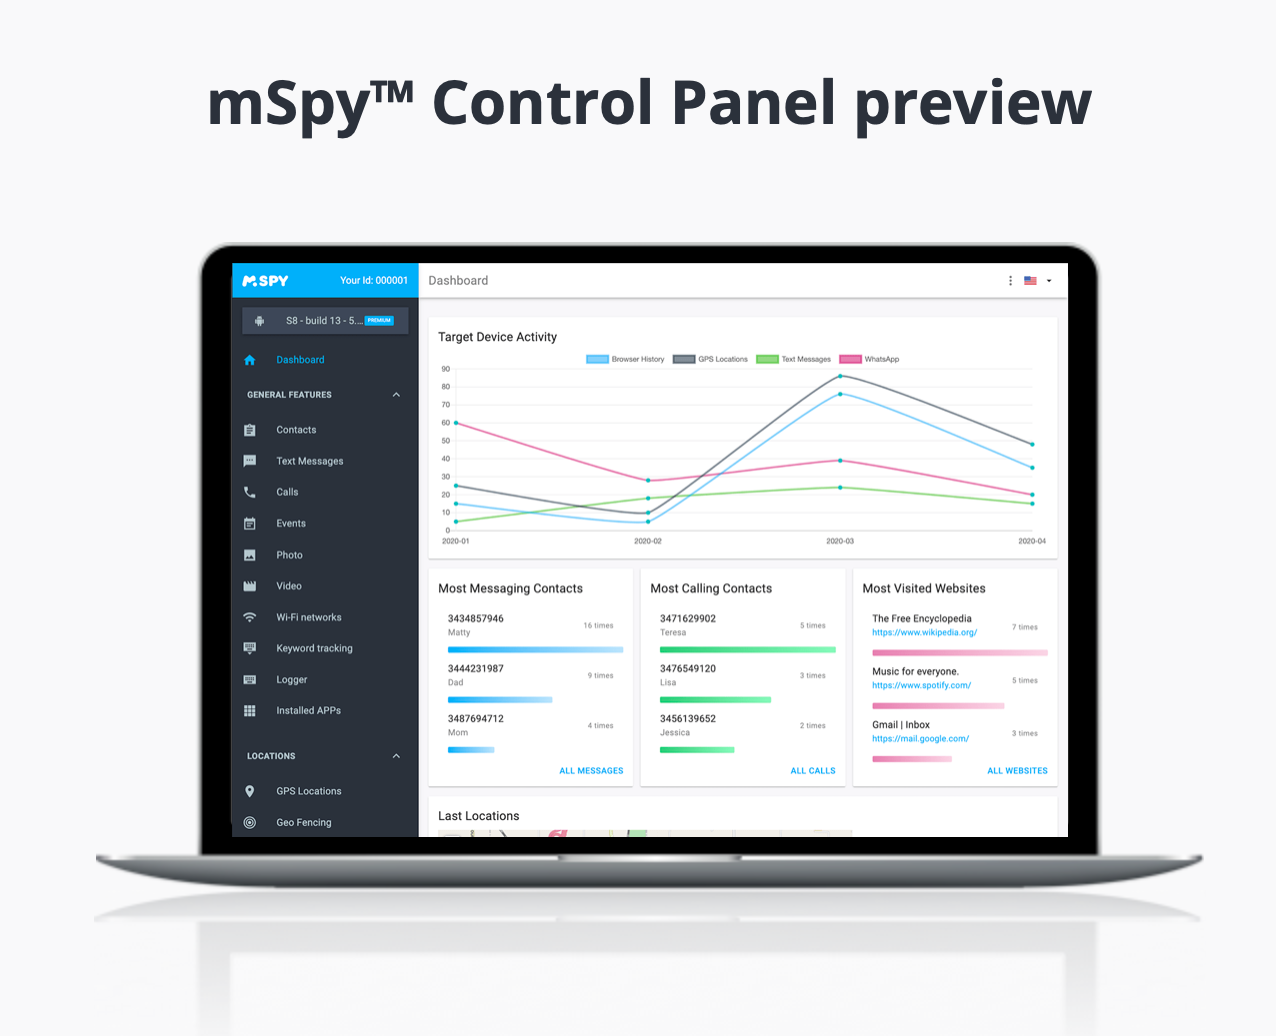 mSpy Control Panel preview